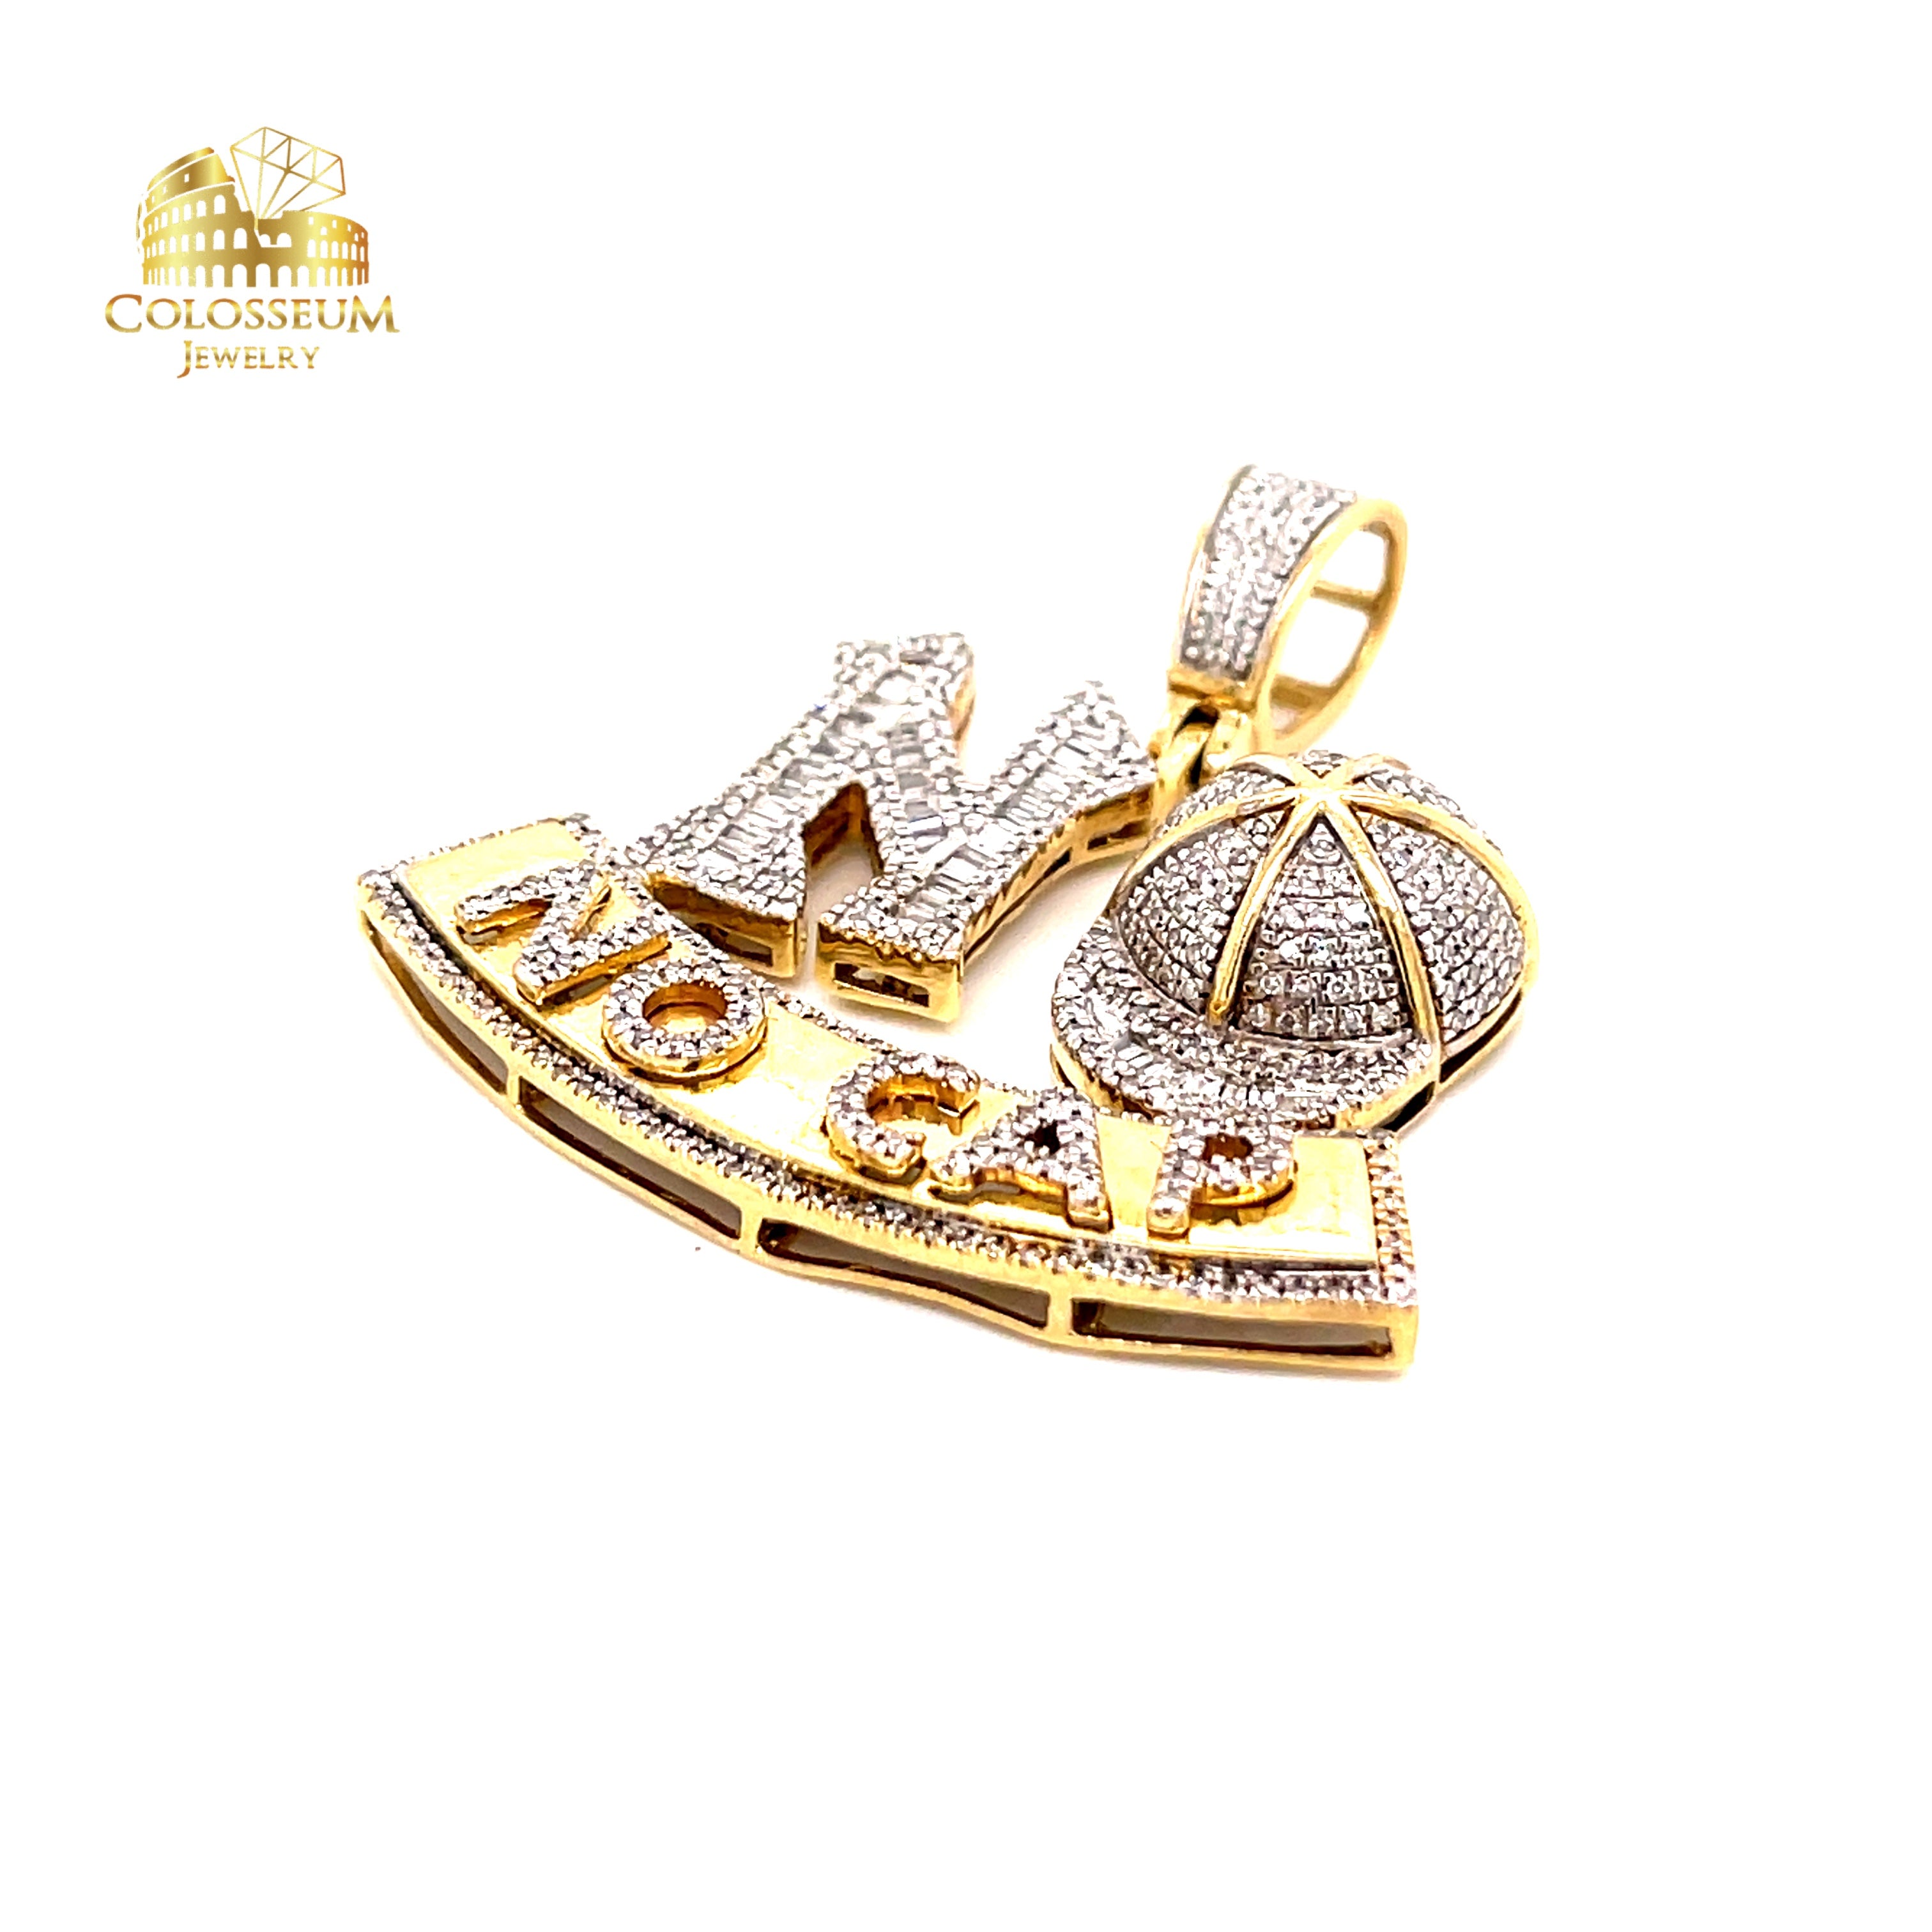 Diamond "No Cap" Charm with 2.29 ctw in Diamonds and 10K Yellow Gold